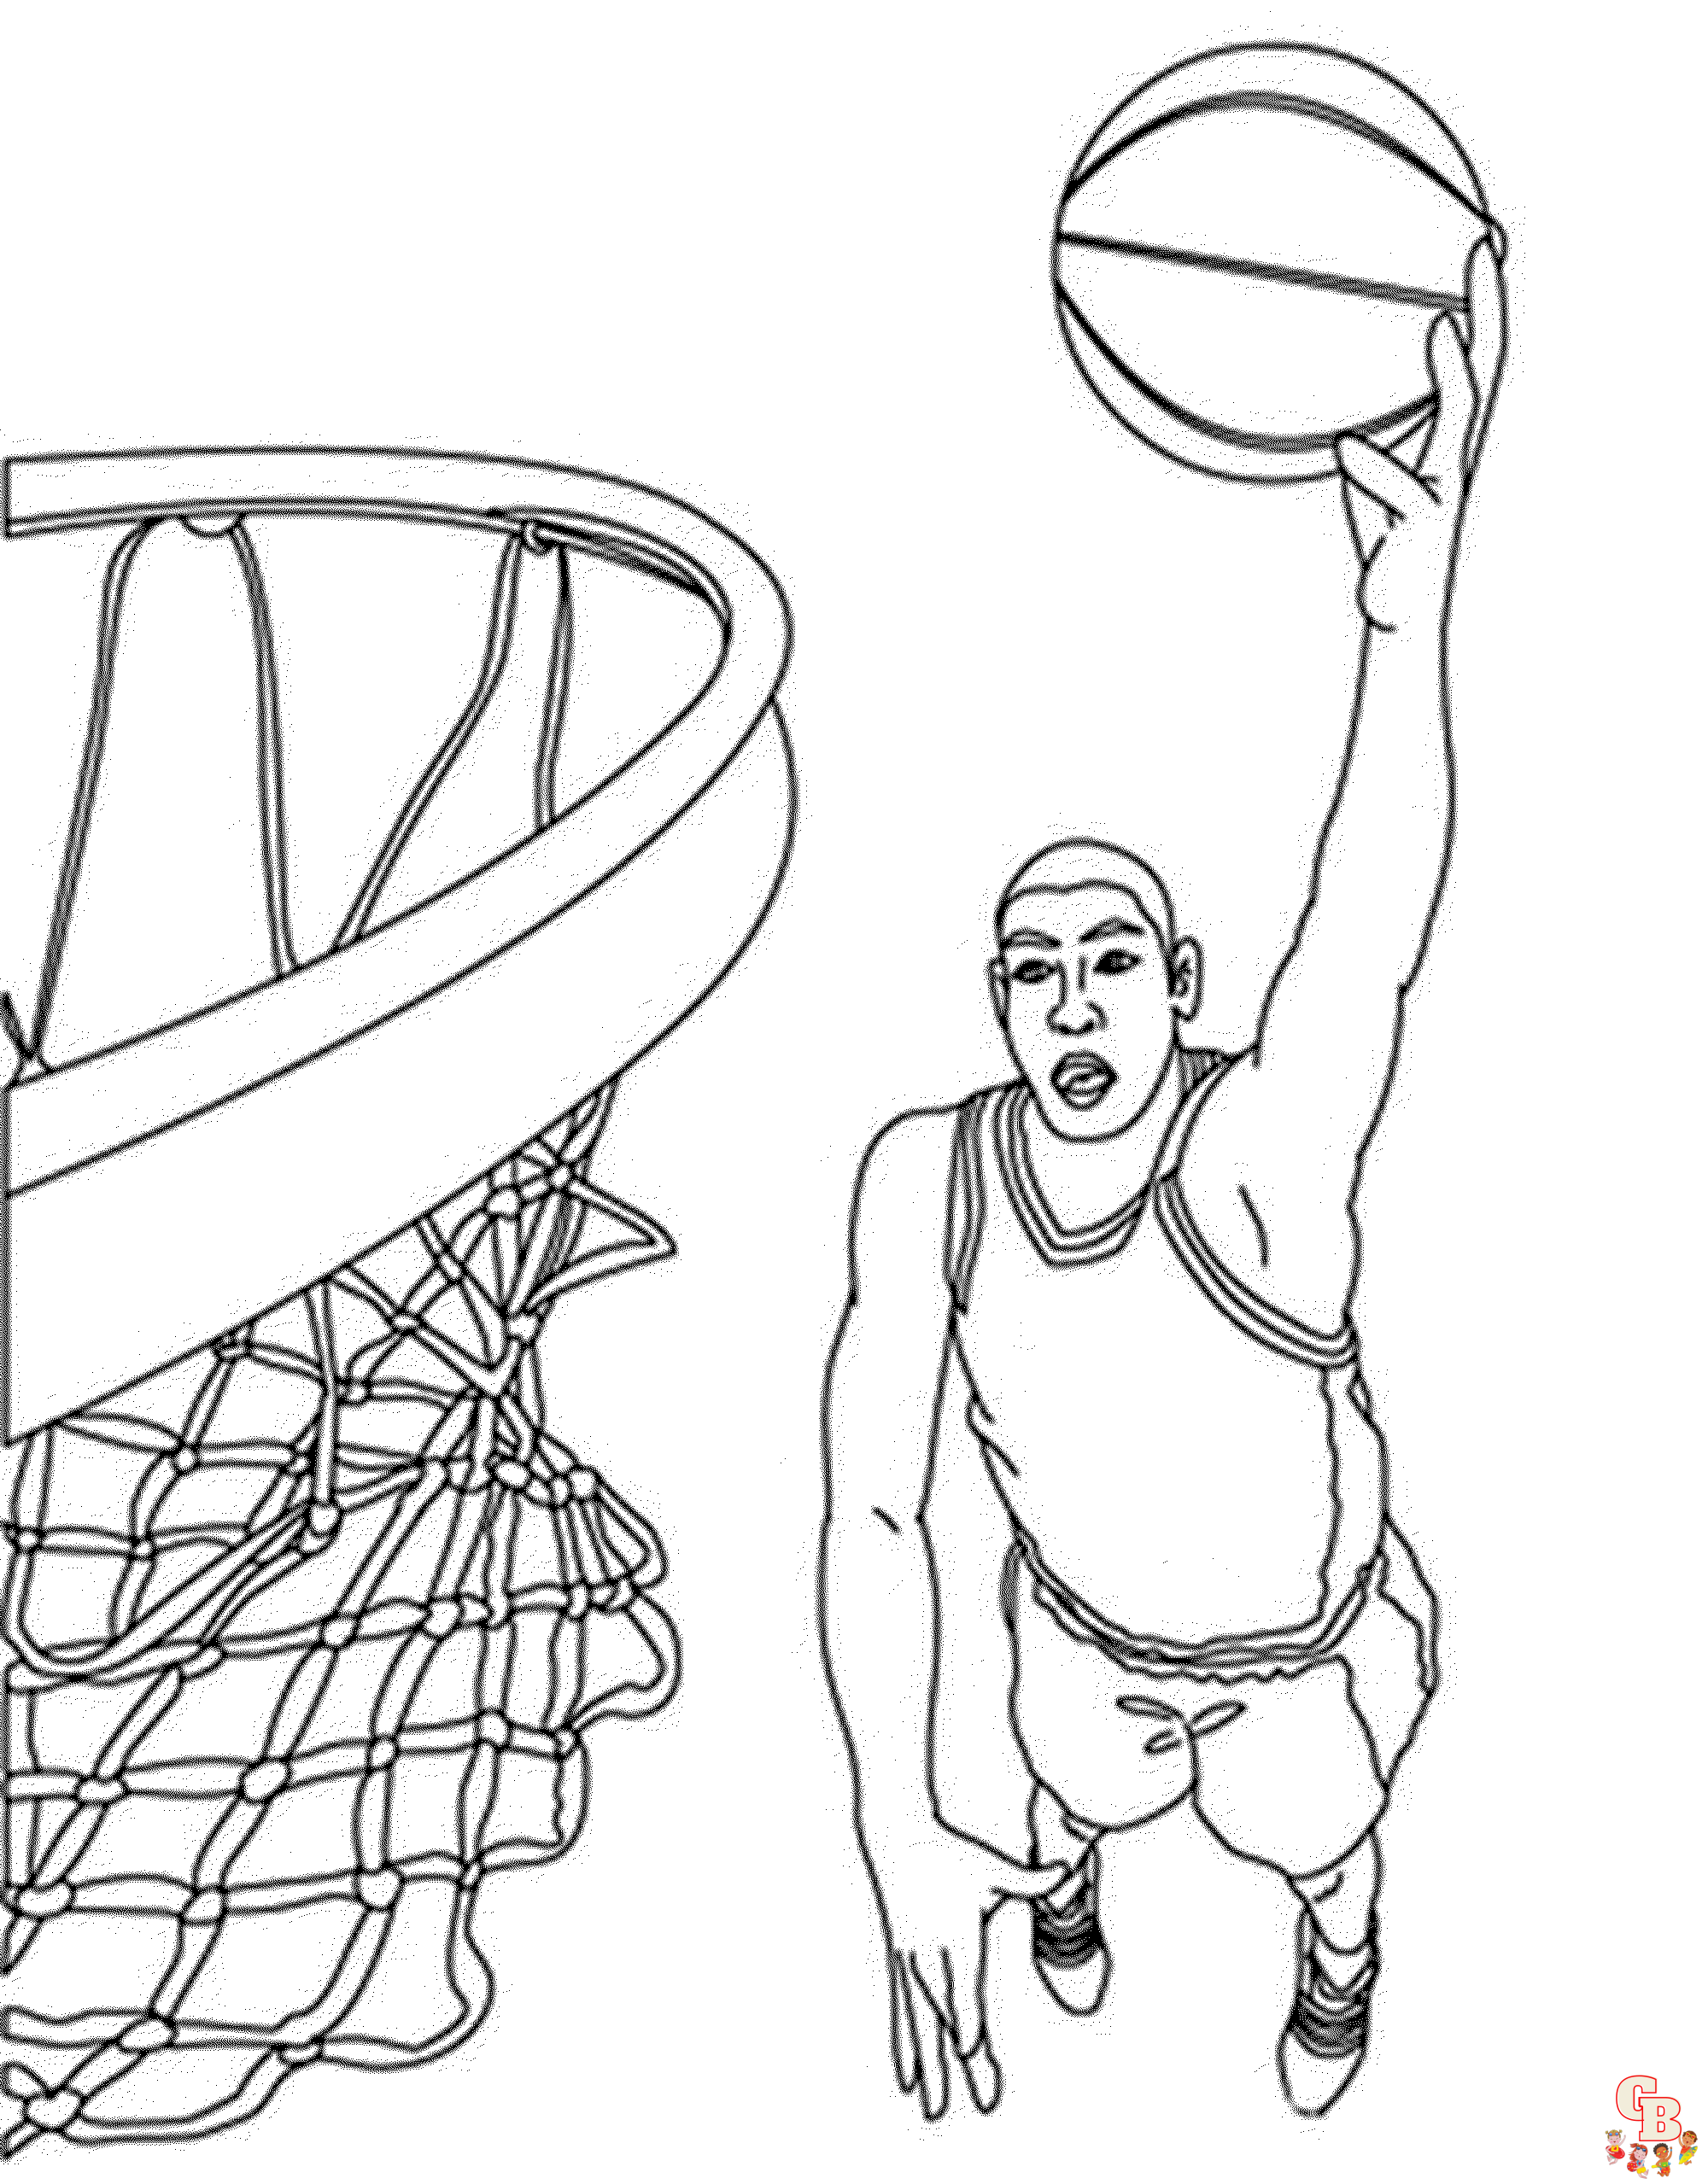 Printable stephen curry coloring pages free for kids and adults